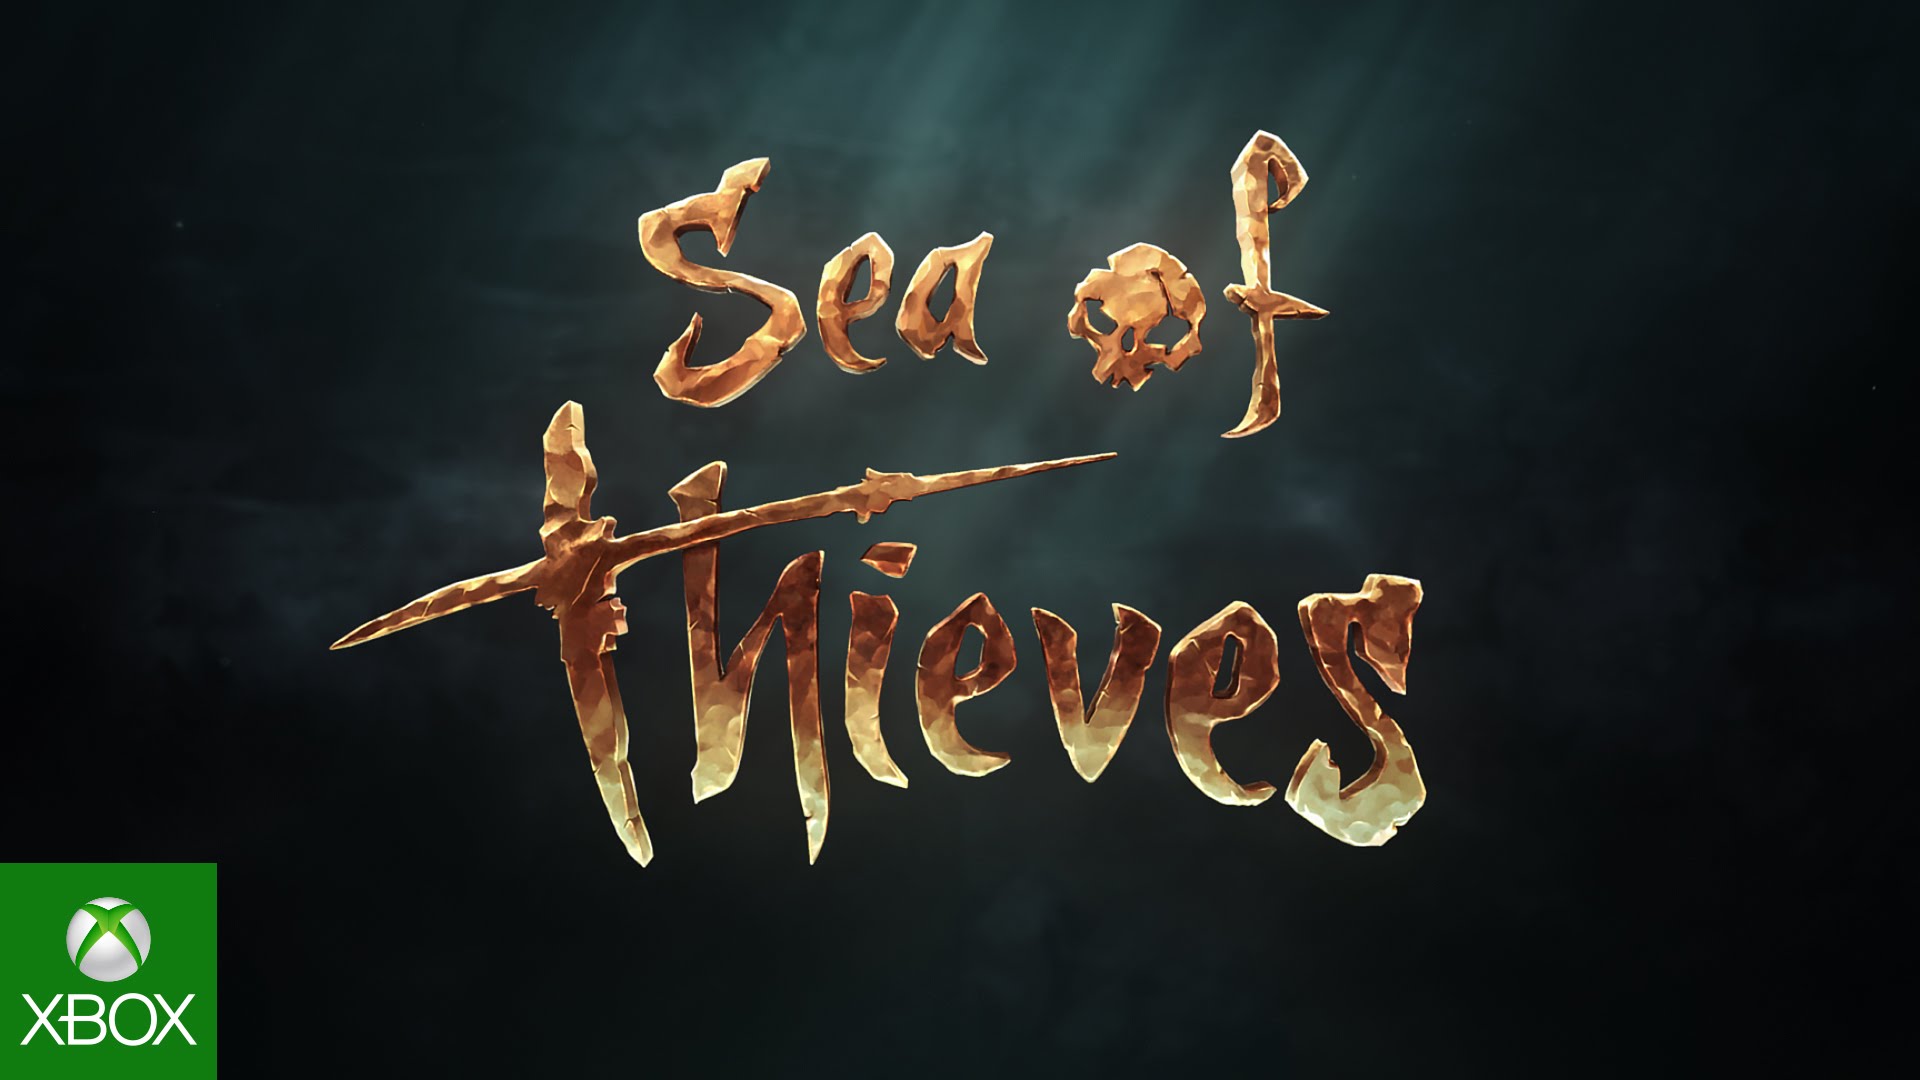 Sea Of Thieves #15